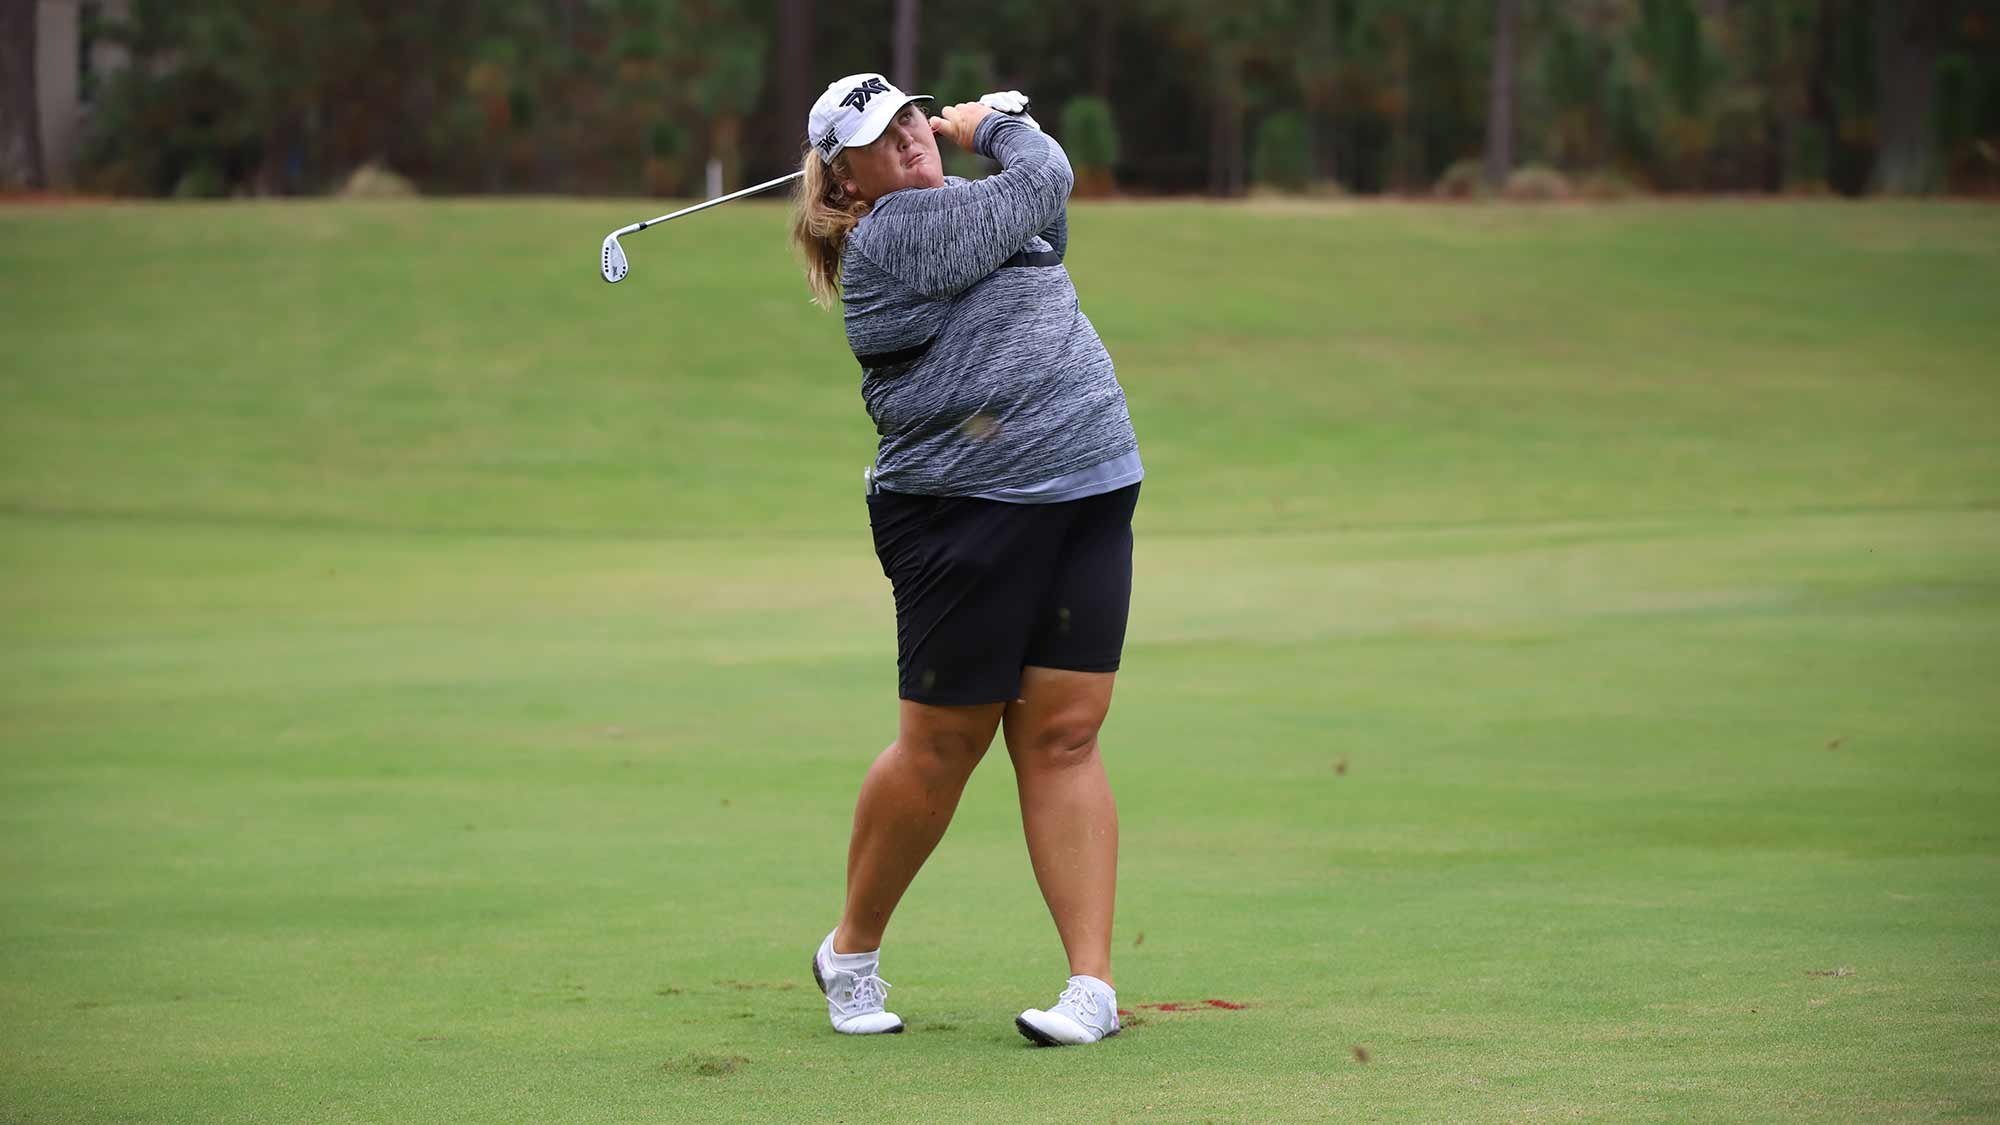 Haley Moore hits a shot during Tuesday's  practice round ahead of the start of the 2019 LPGA Q-Series at Pinehurst Resort